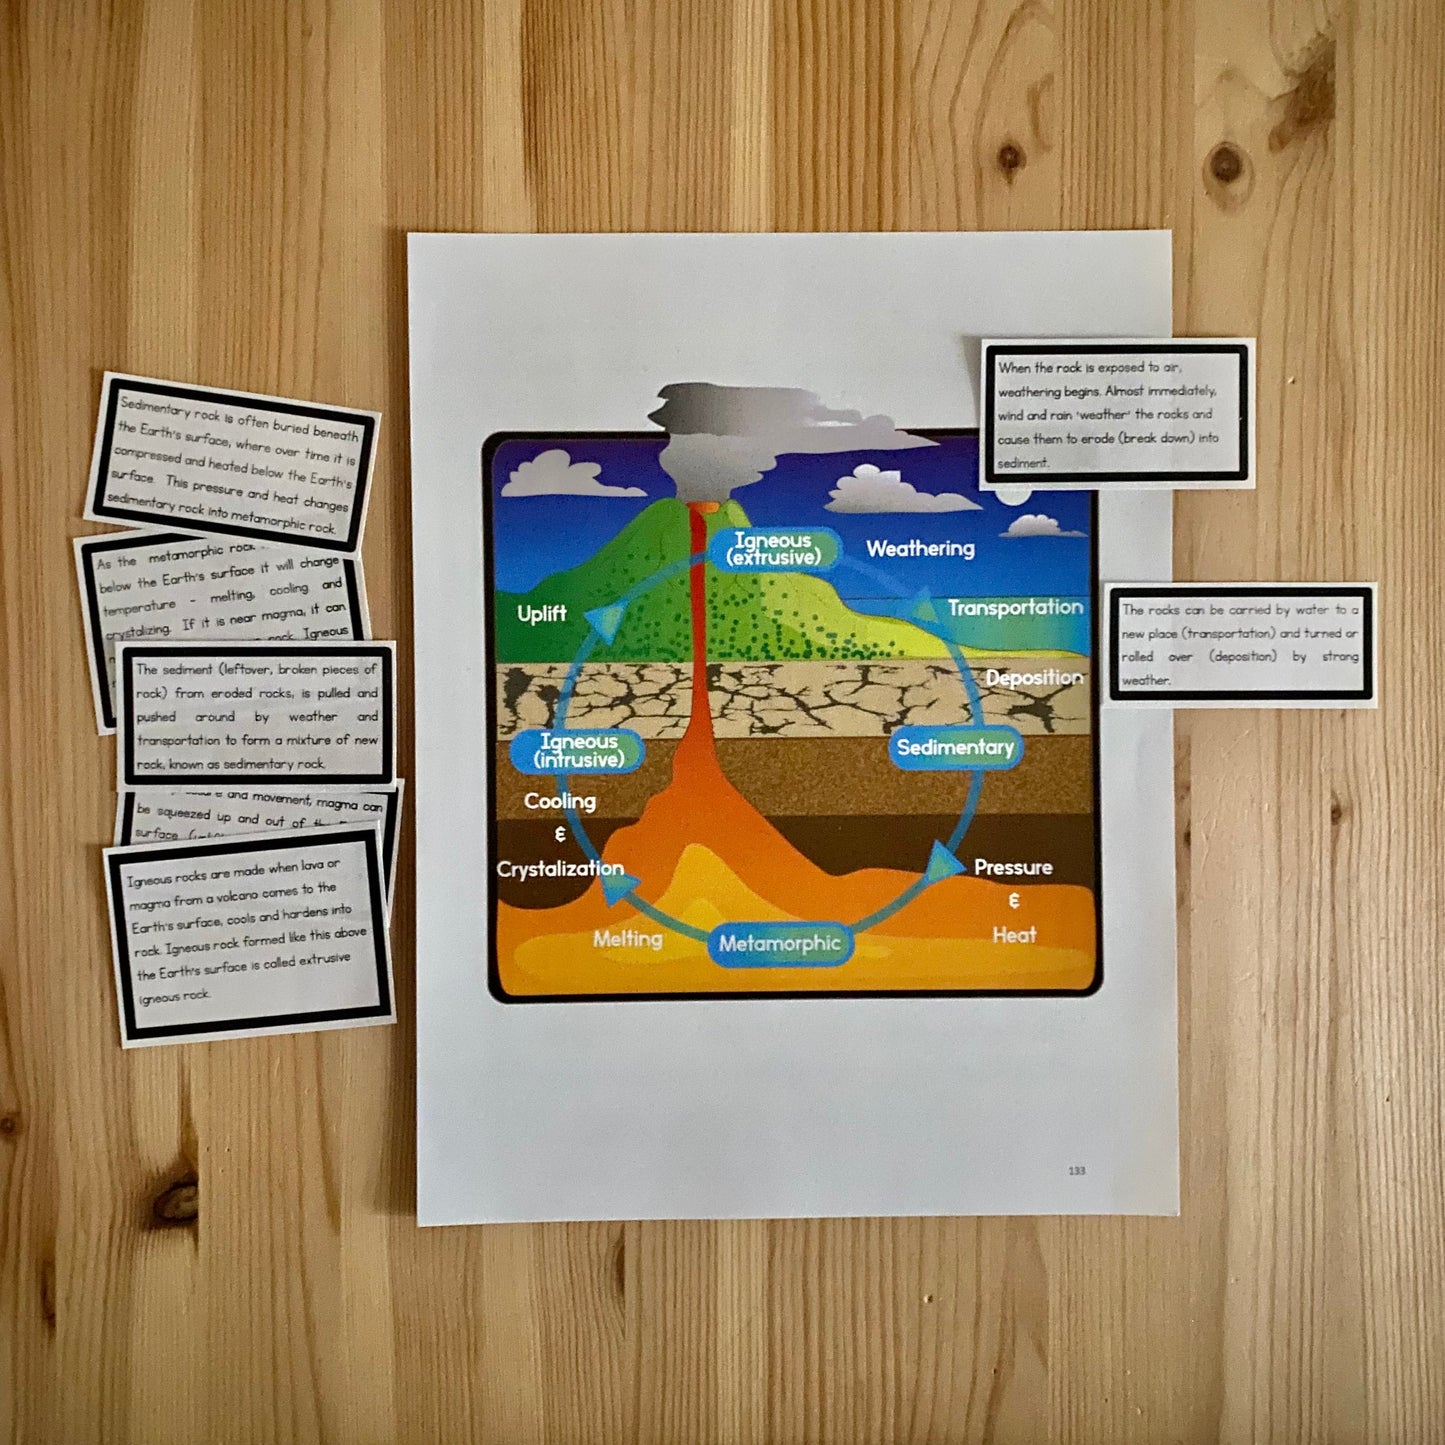 Rocks and Rock Cycle Lessons - montessorikiwi